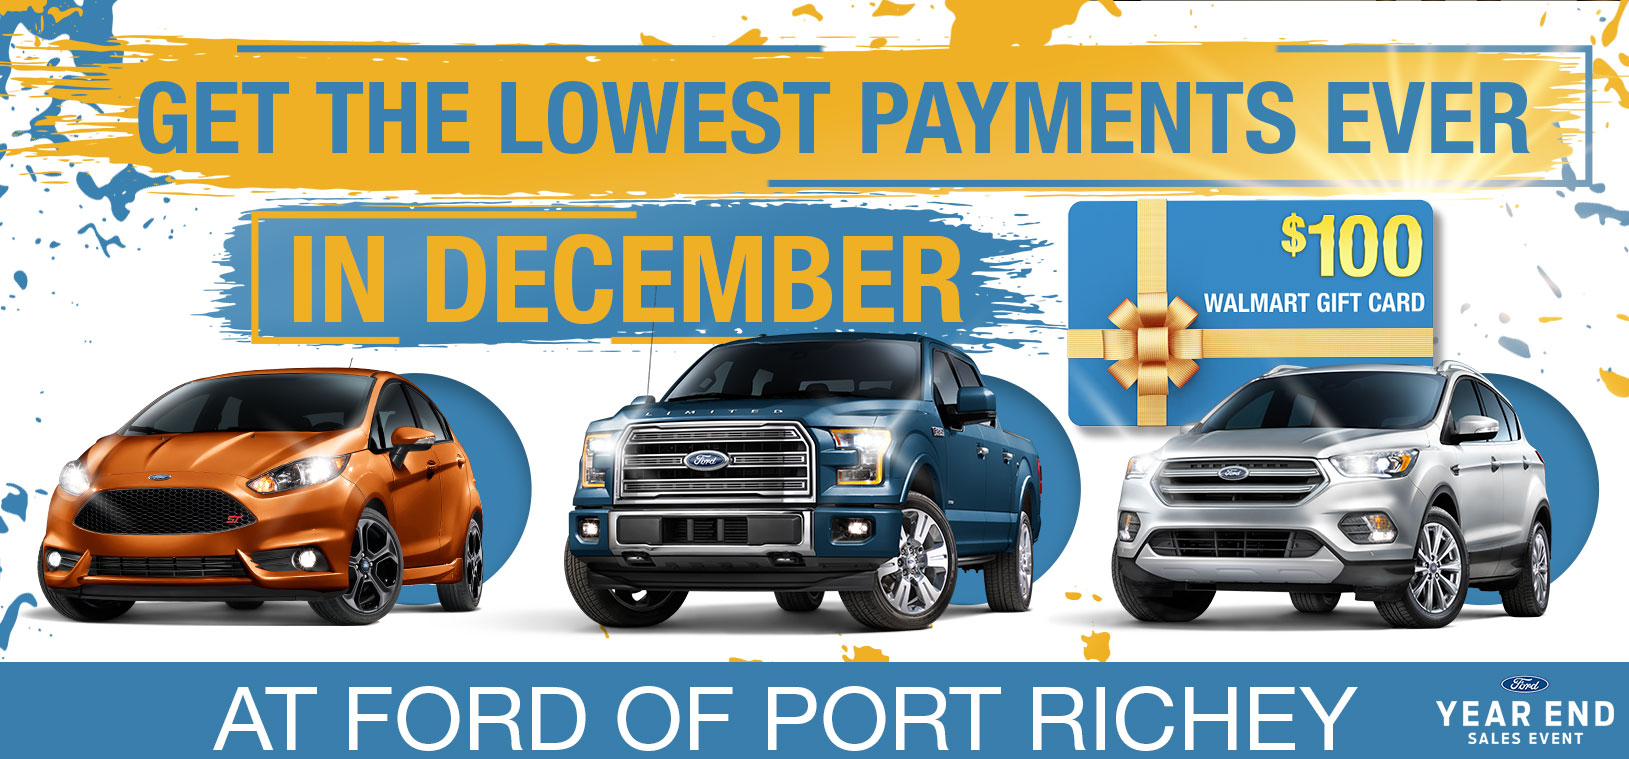 Get The Lowest Payments Ever In December